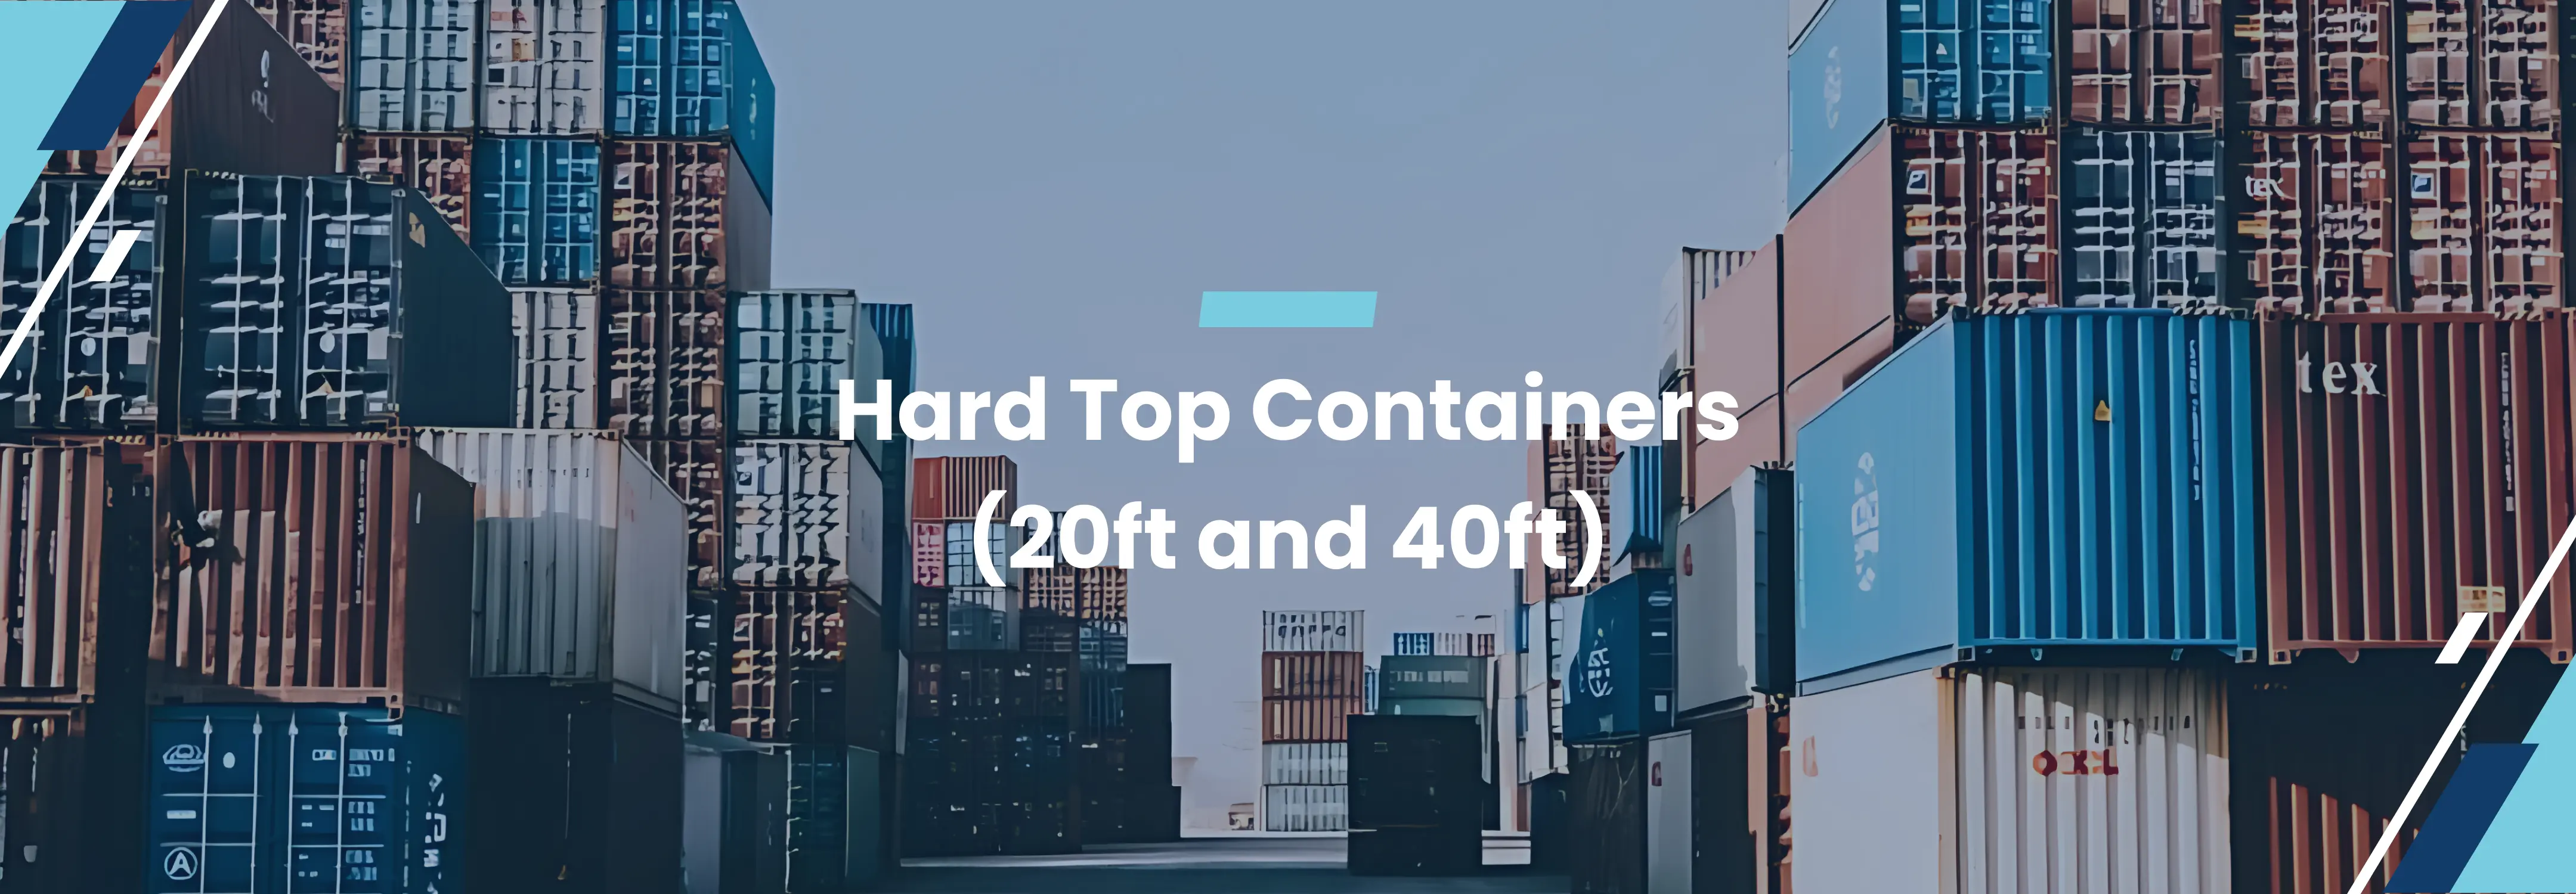 Banner of Hard Top Containers